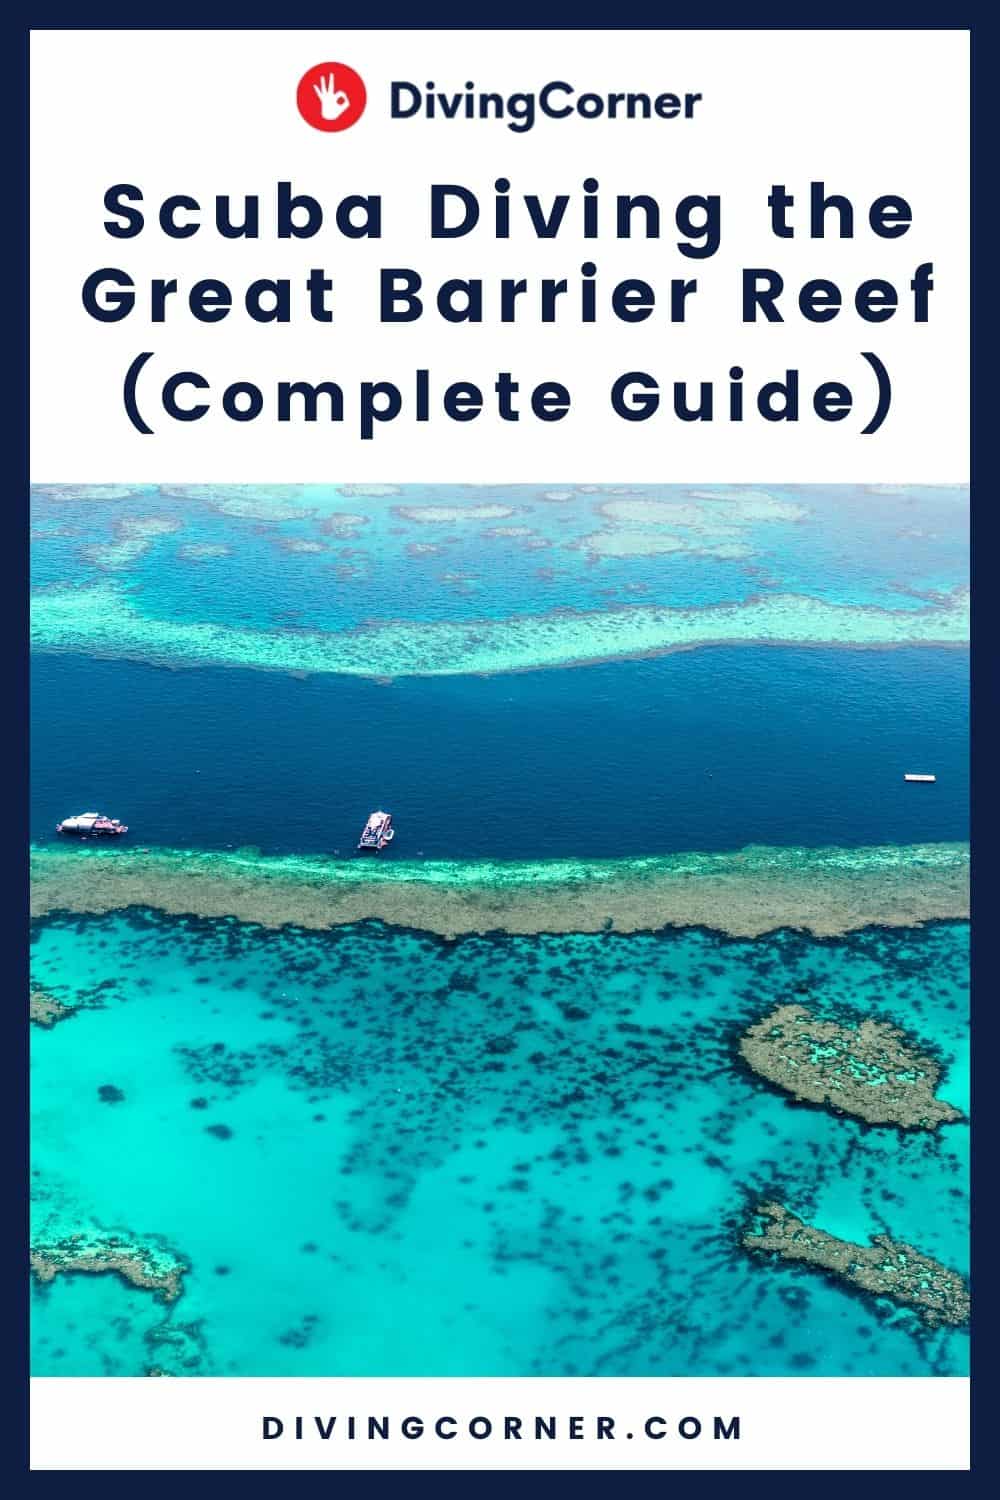 Scuba Diving the Great Barrier Reef (Complete Guide) - DivingCorner